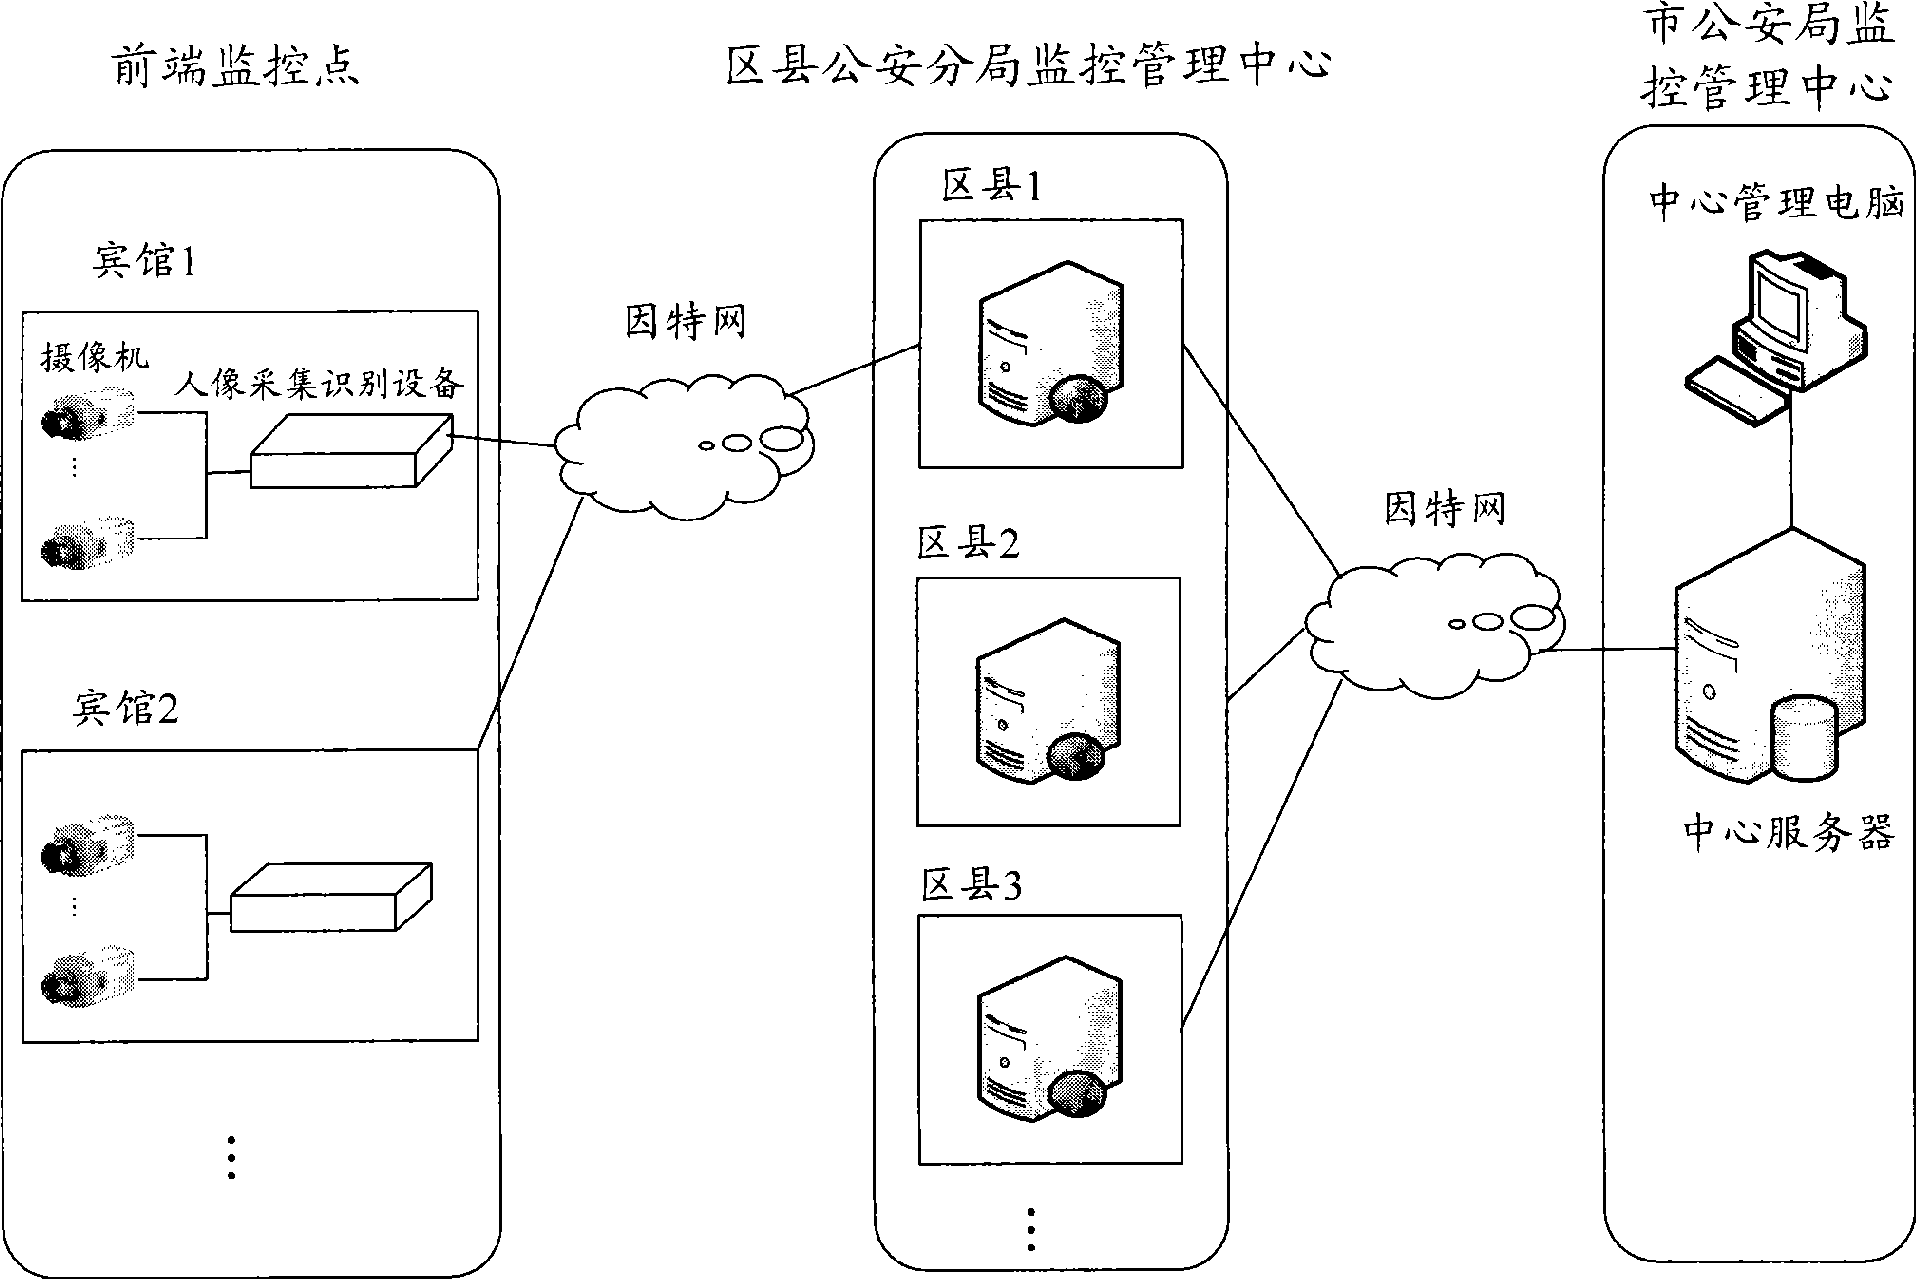 Human face collecting identification monitoring system and method for hotel, office building and public place for entertainment